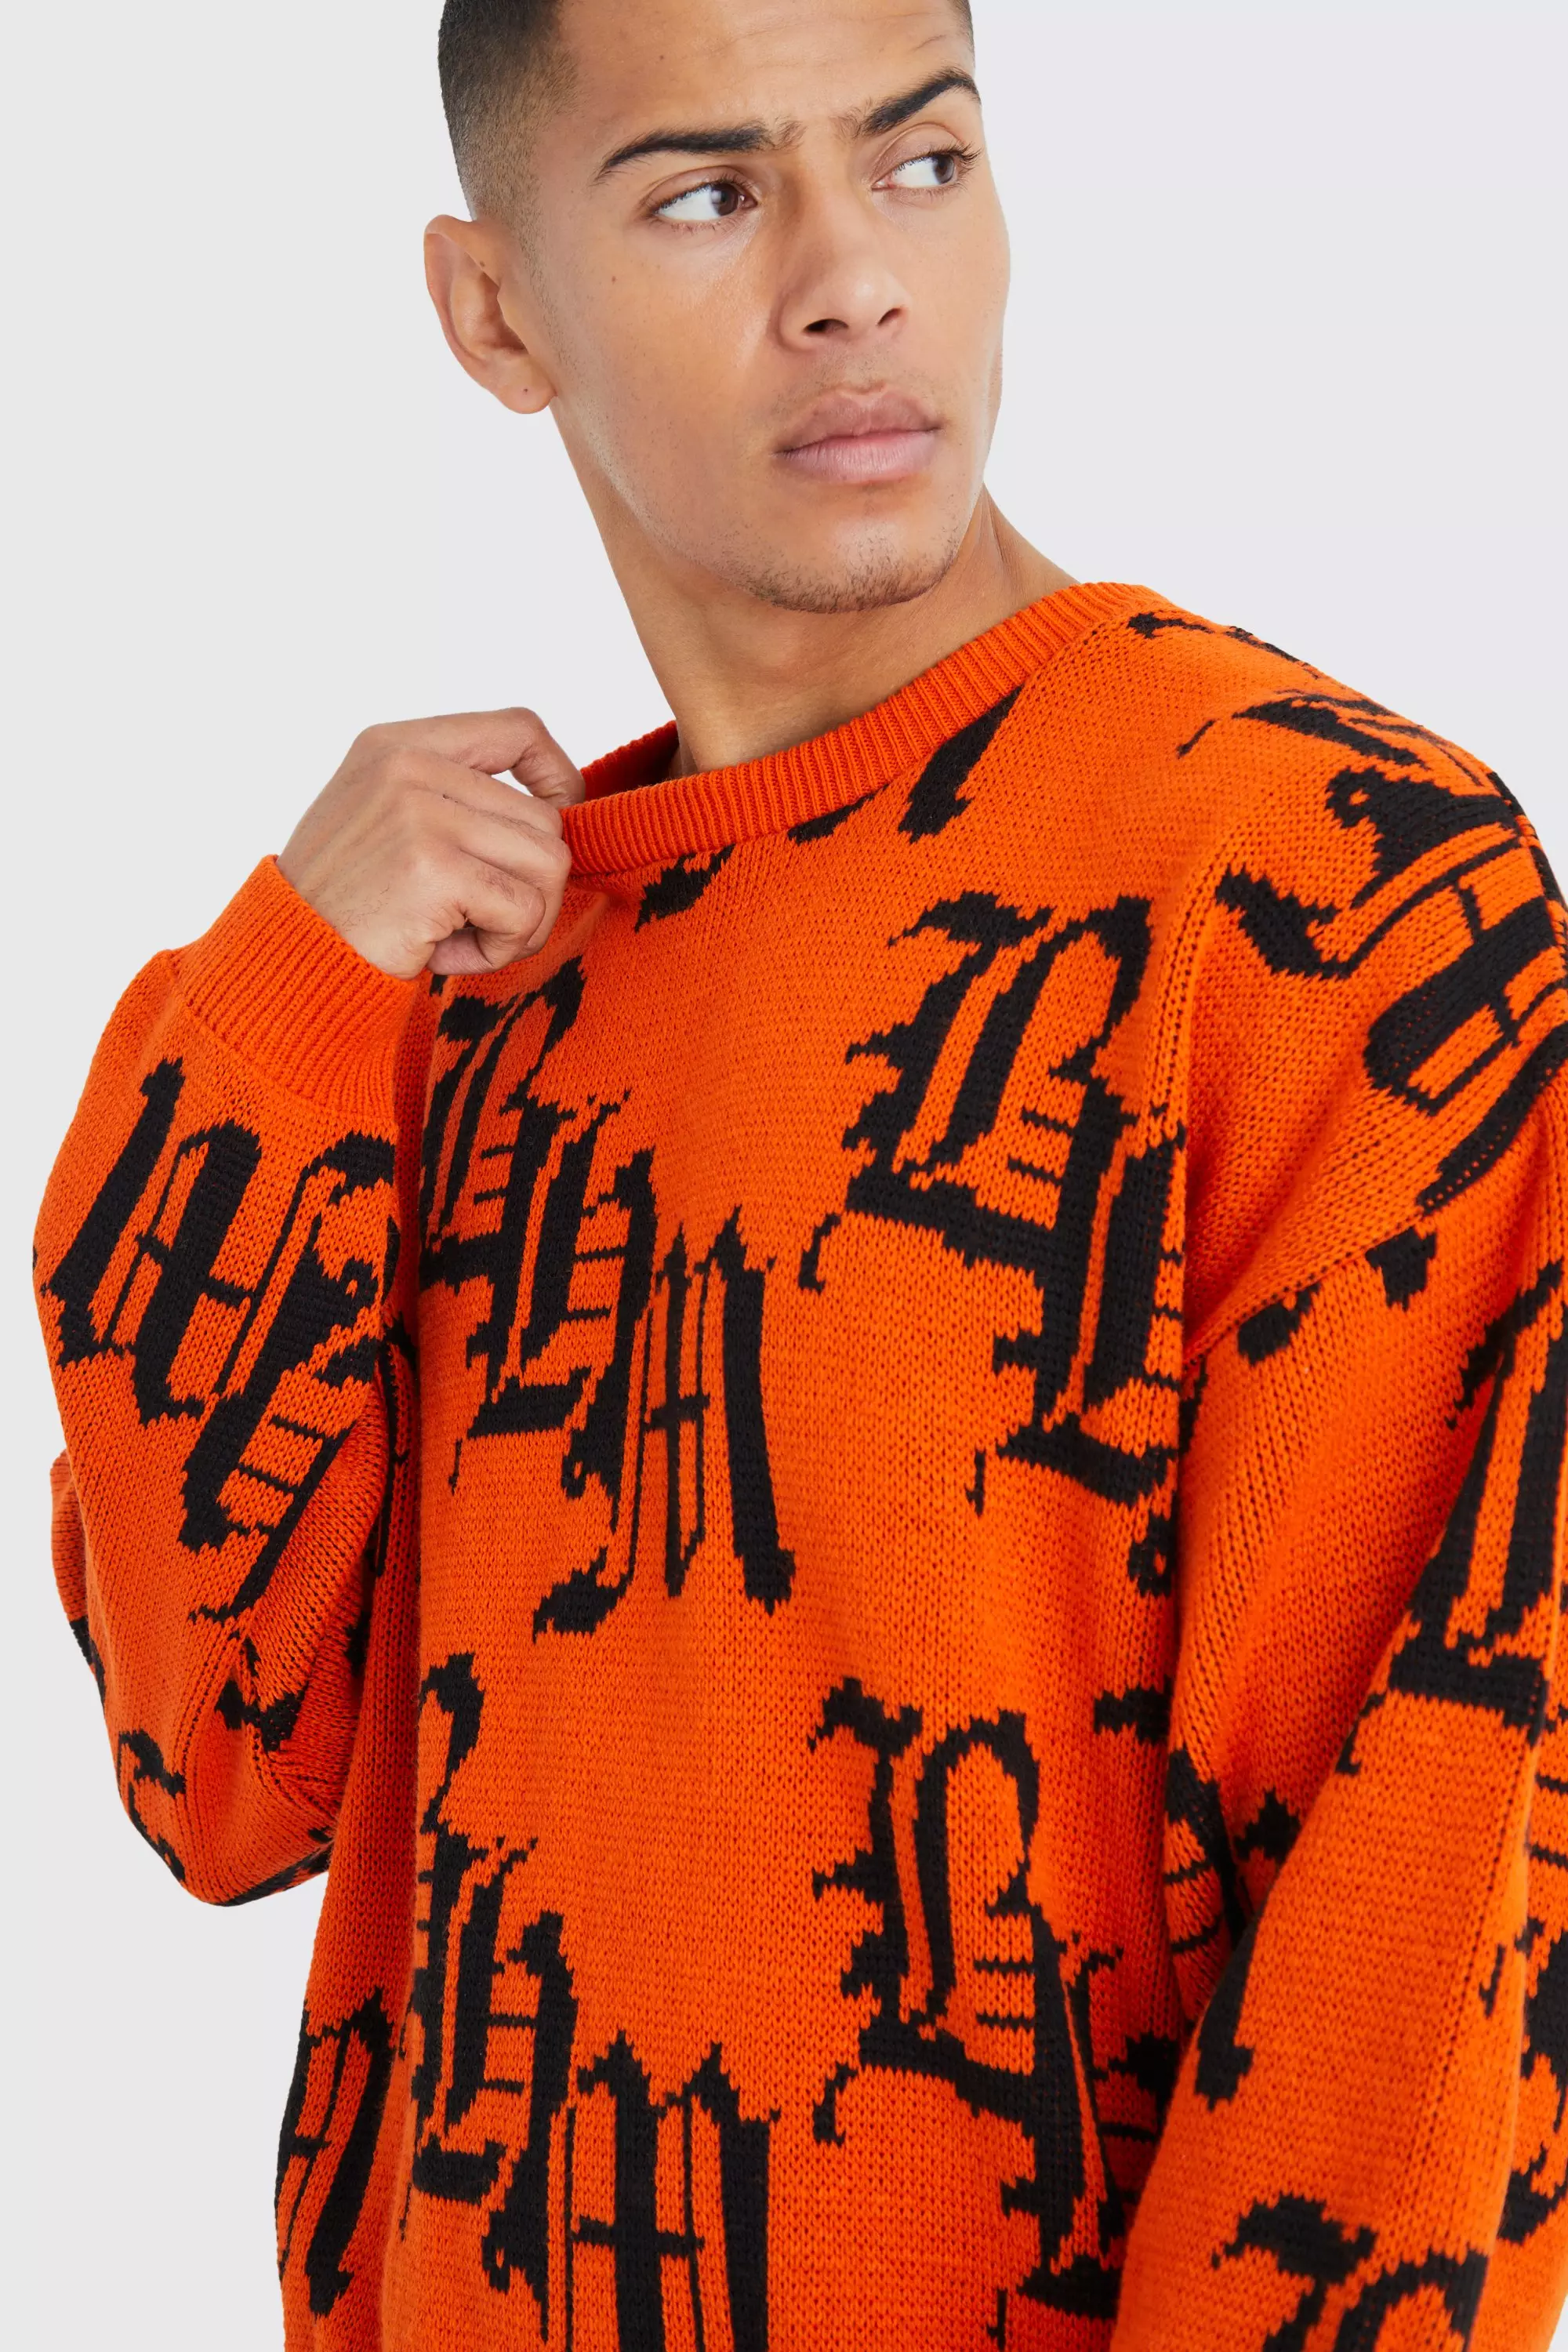 boohooMAN Boxy All Over Print Knitted Jumper - Orange - Size XL